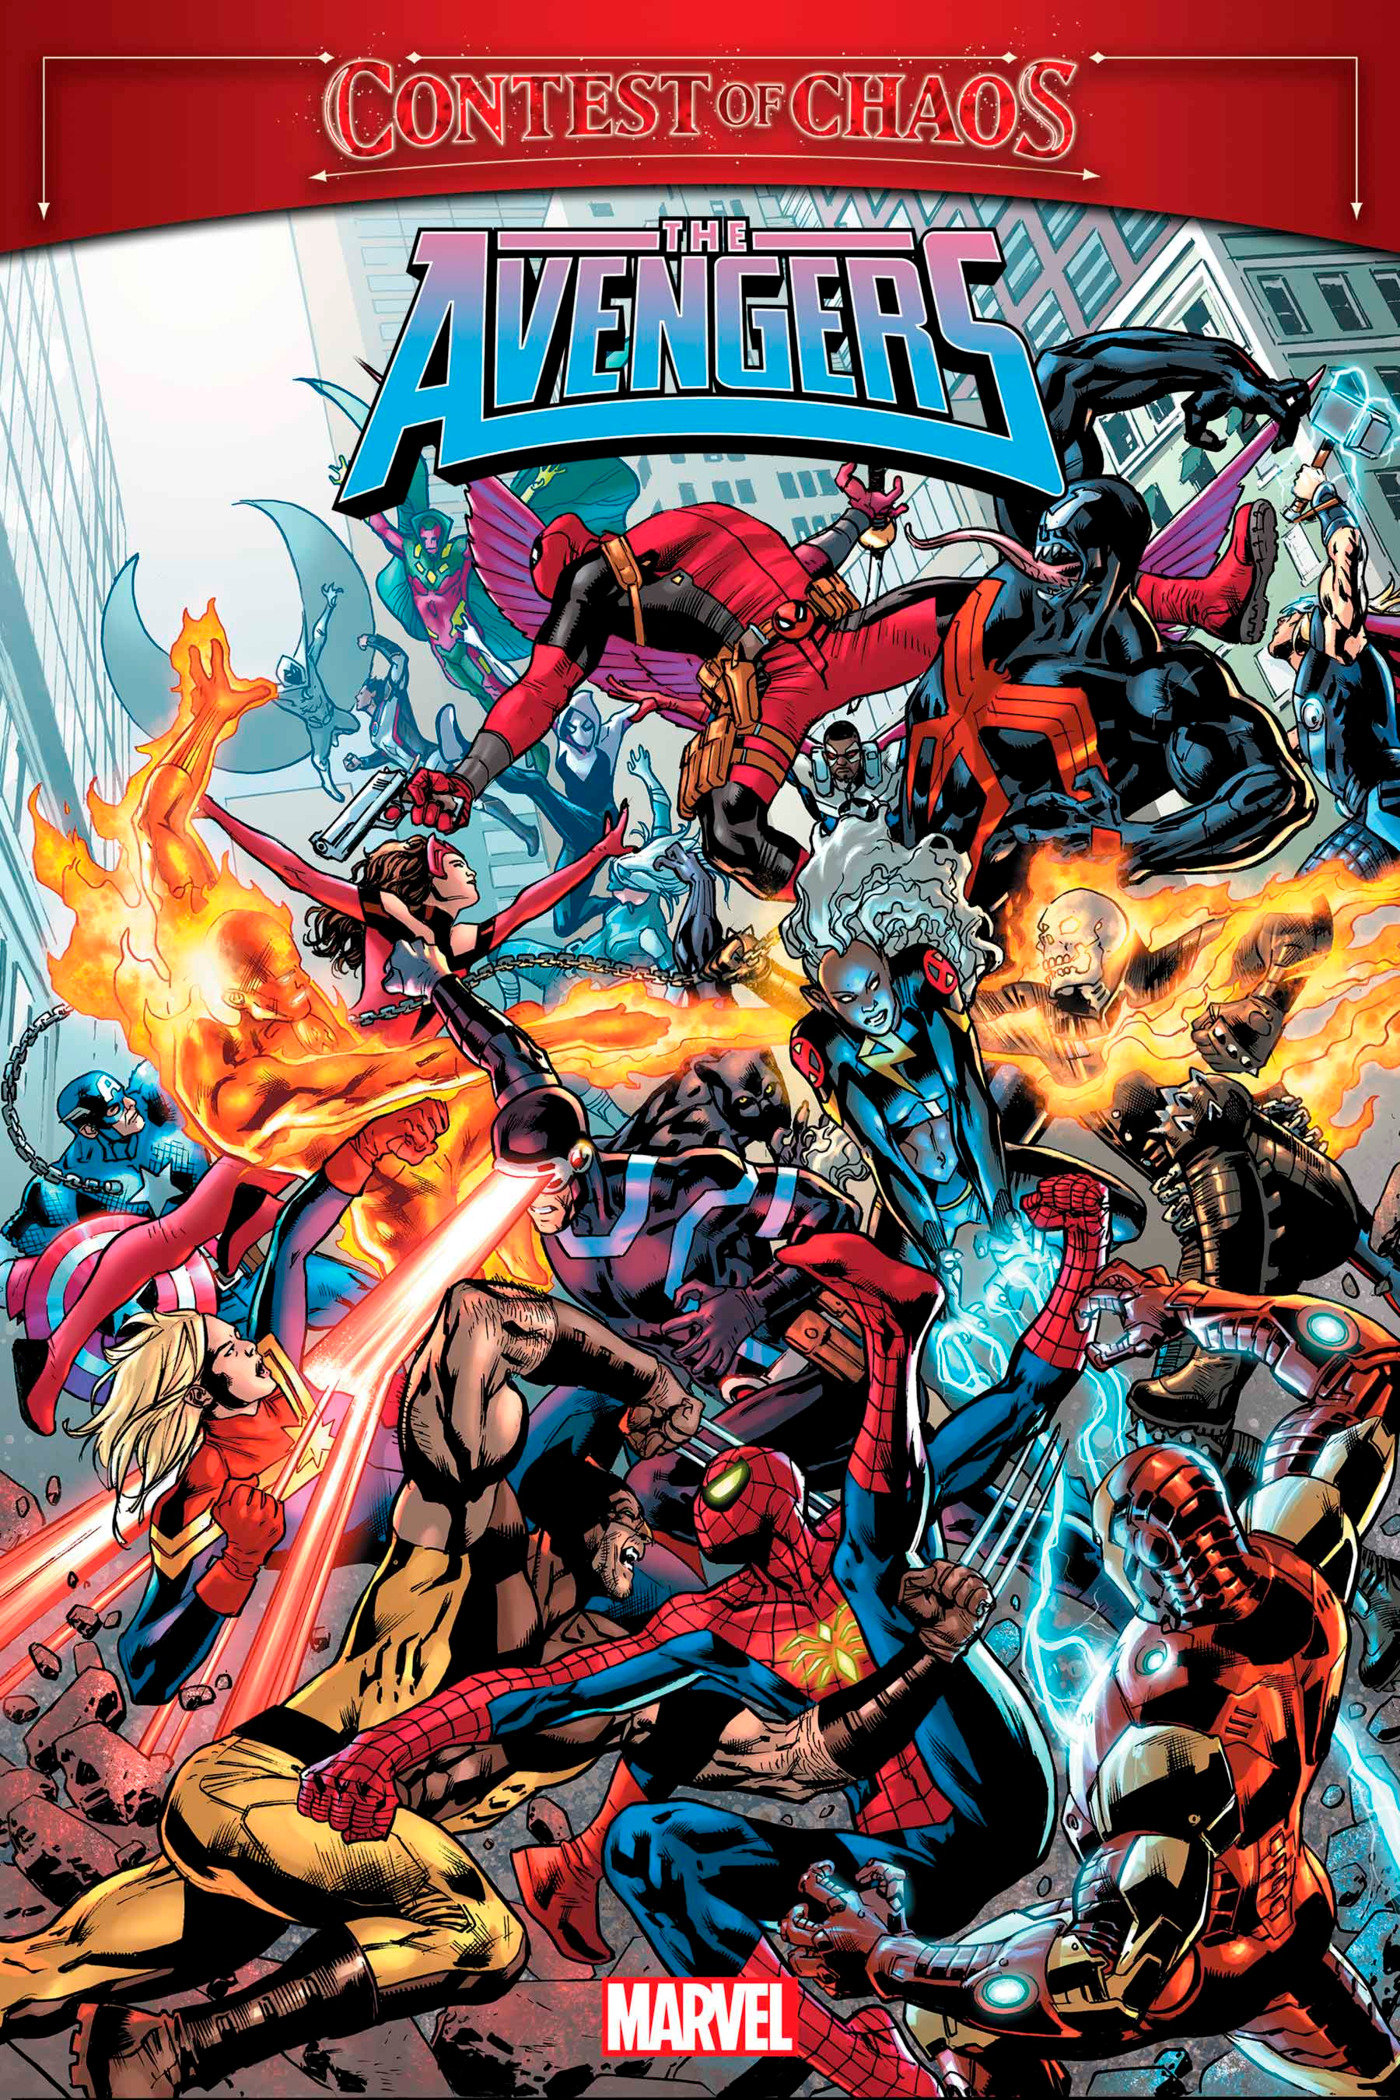 Avengers Annual #1 Bryan Hitch Variant [Chaos]